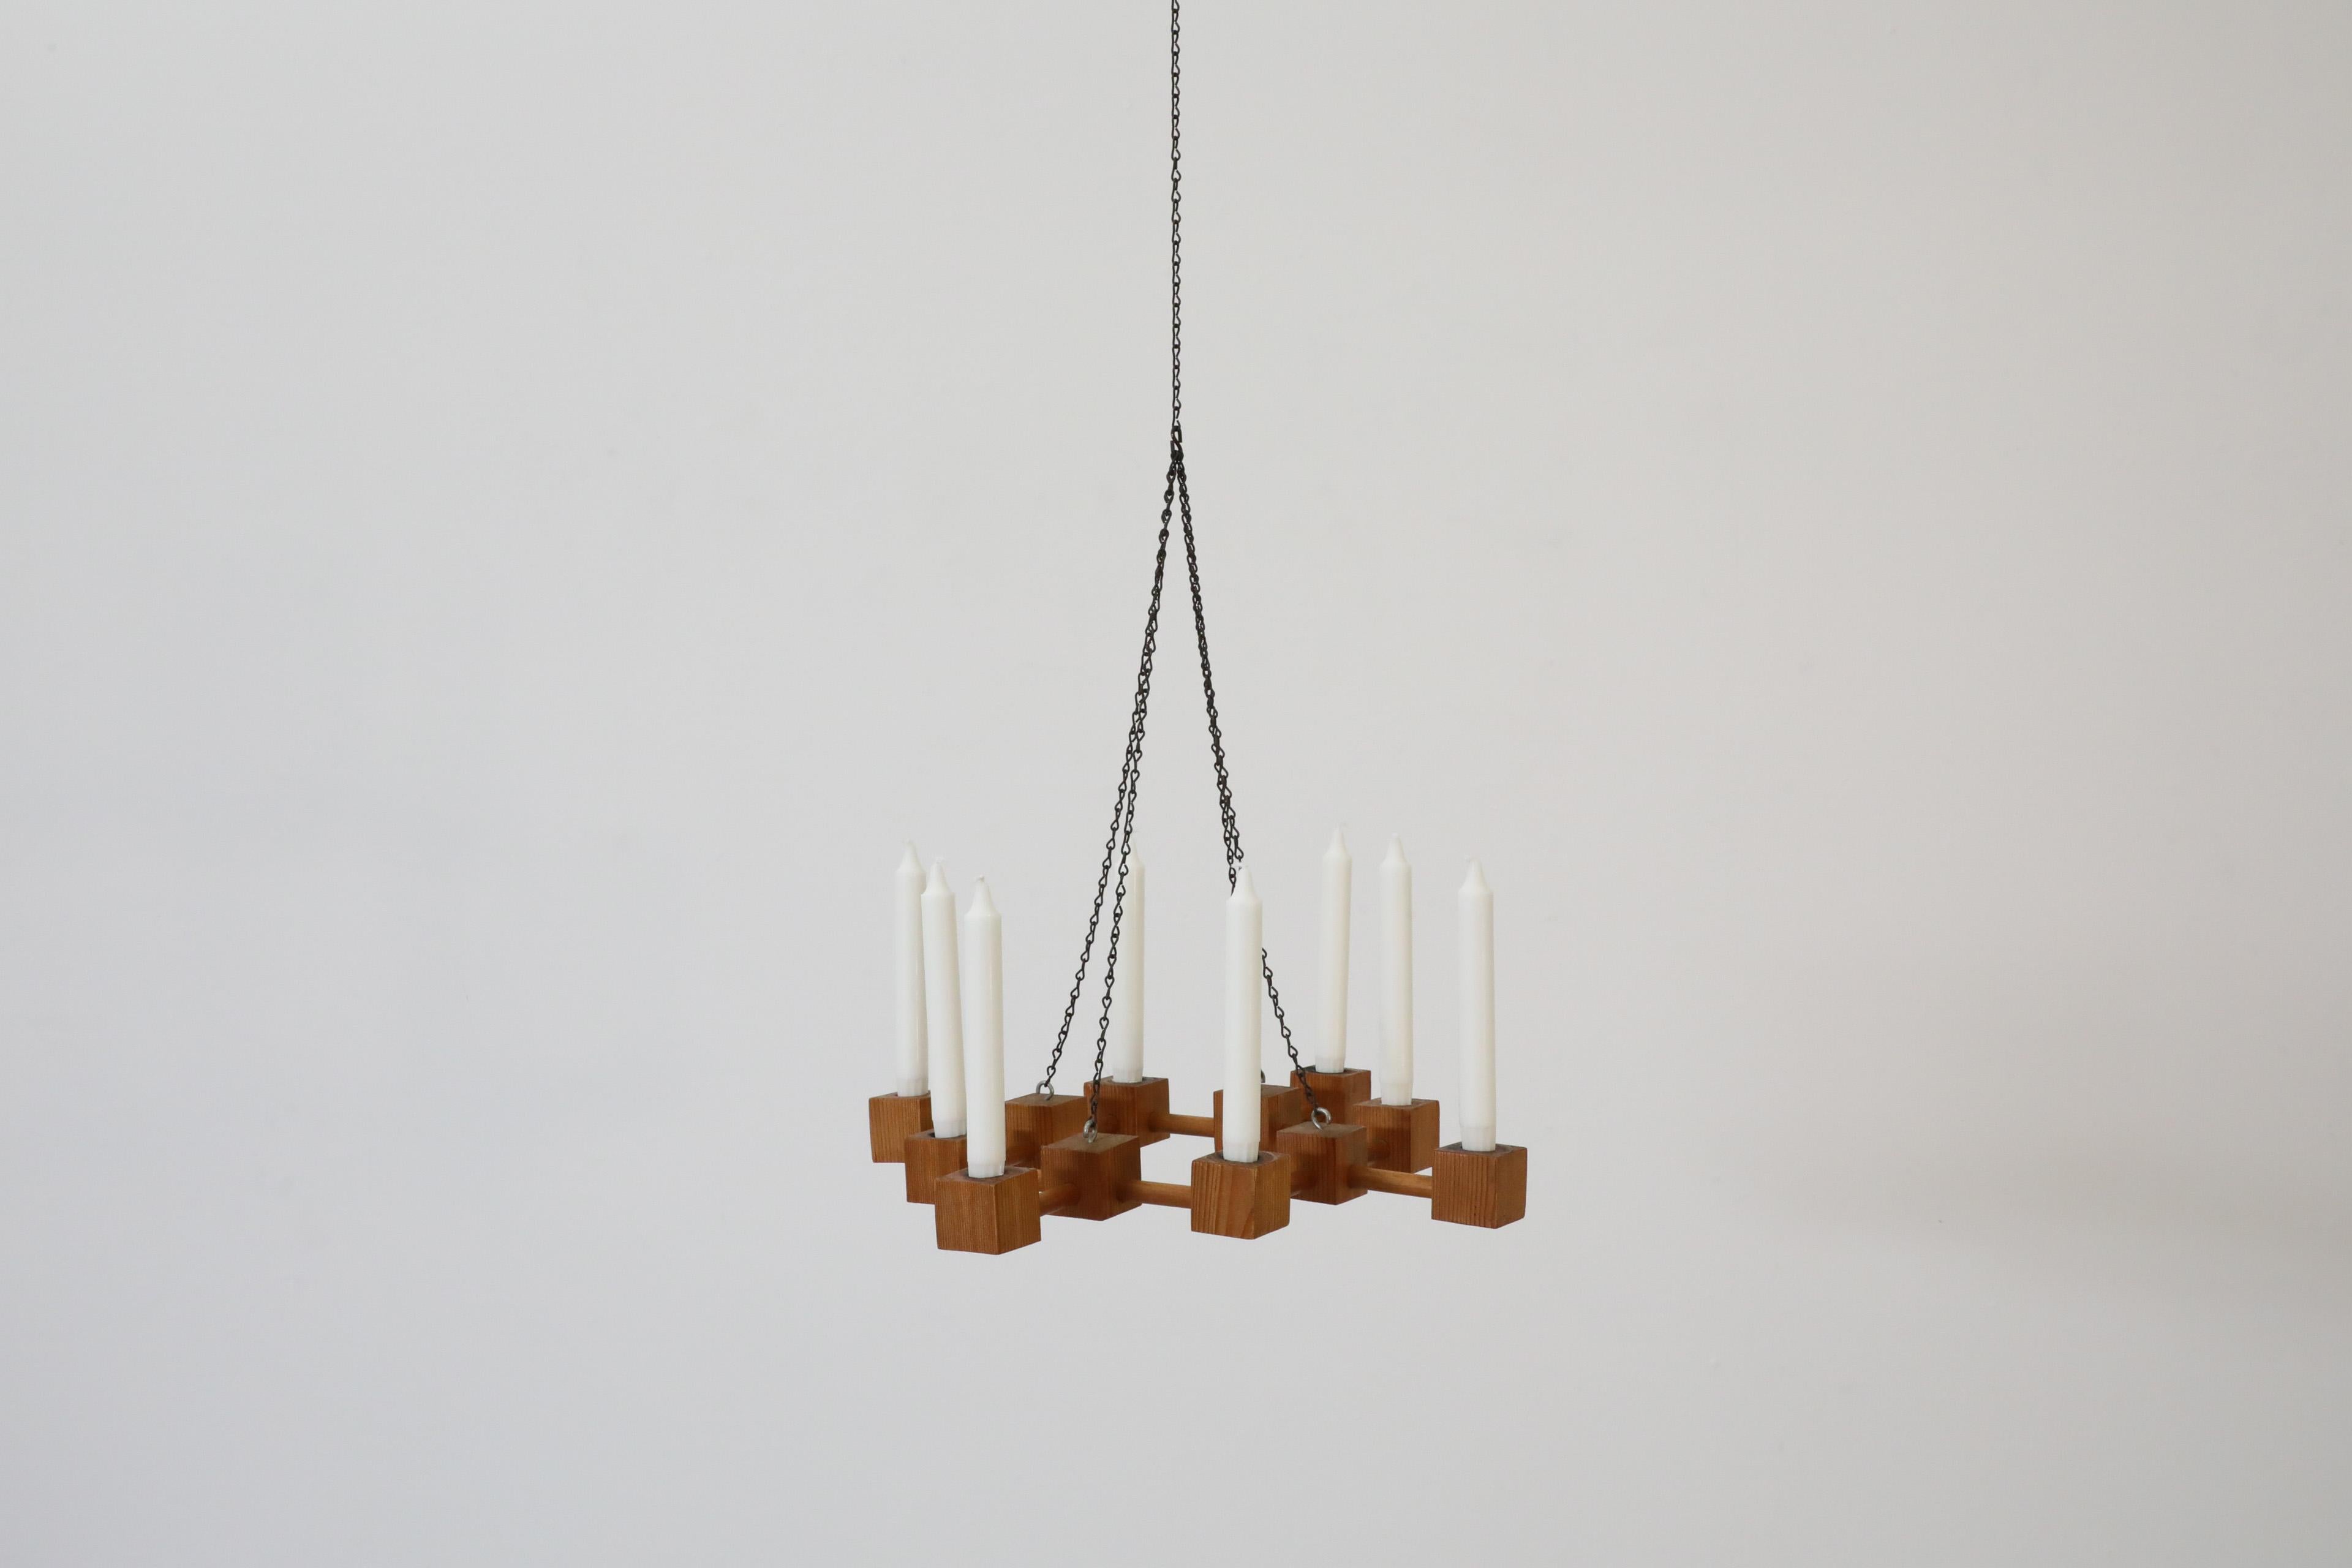 Mid-Century sculptural pine hanging candelabra with oxidized steel chain. Handsome candelabra made with multiple pine cubes. In original condition with visible wear consistent with its age and use. Other pine candelabras are available and listed